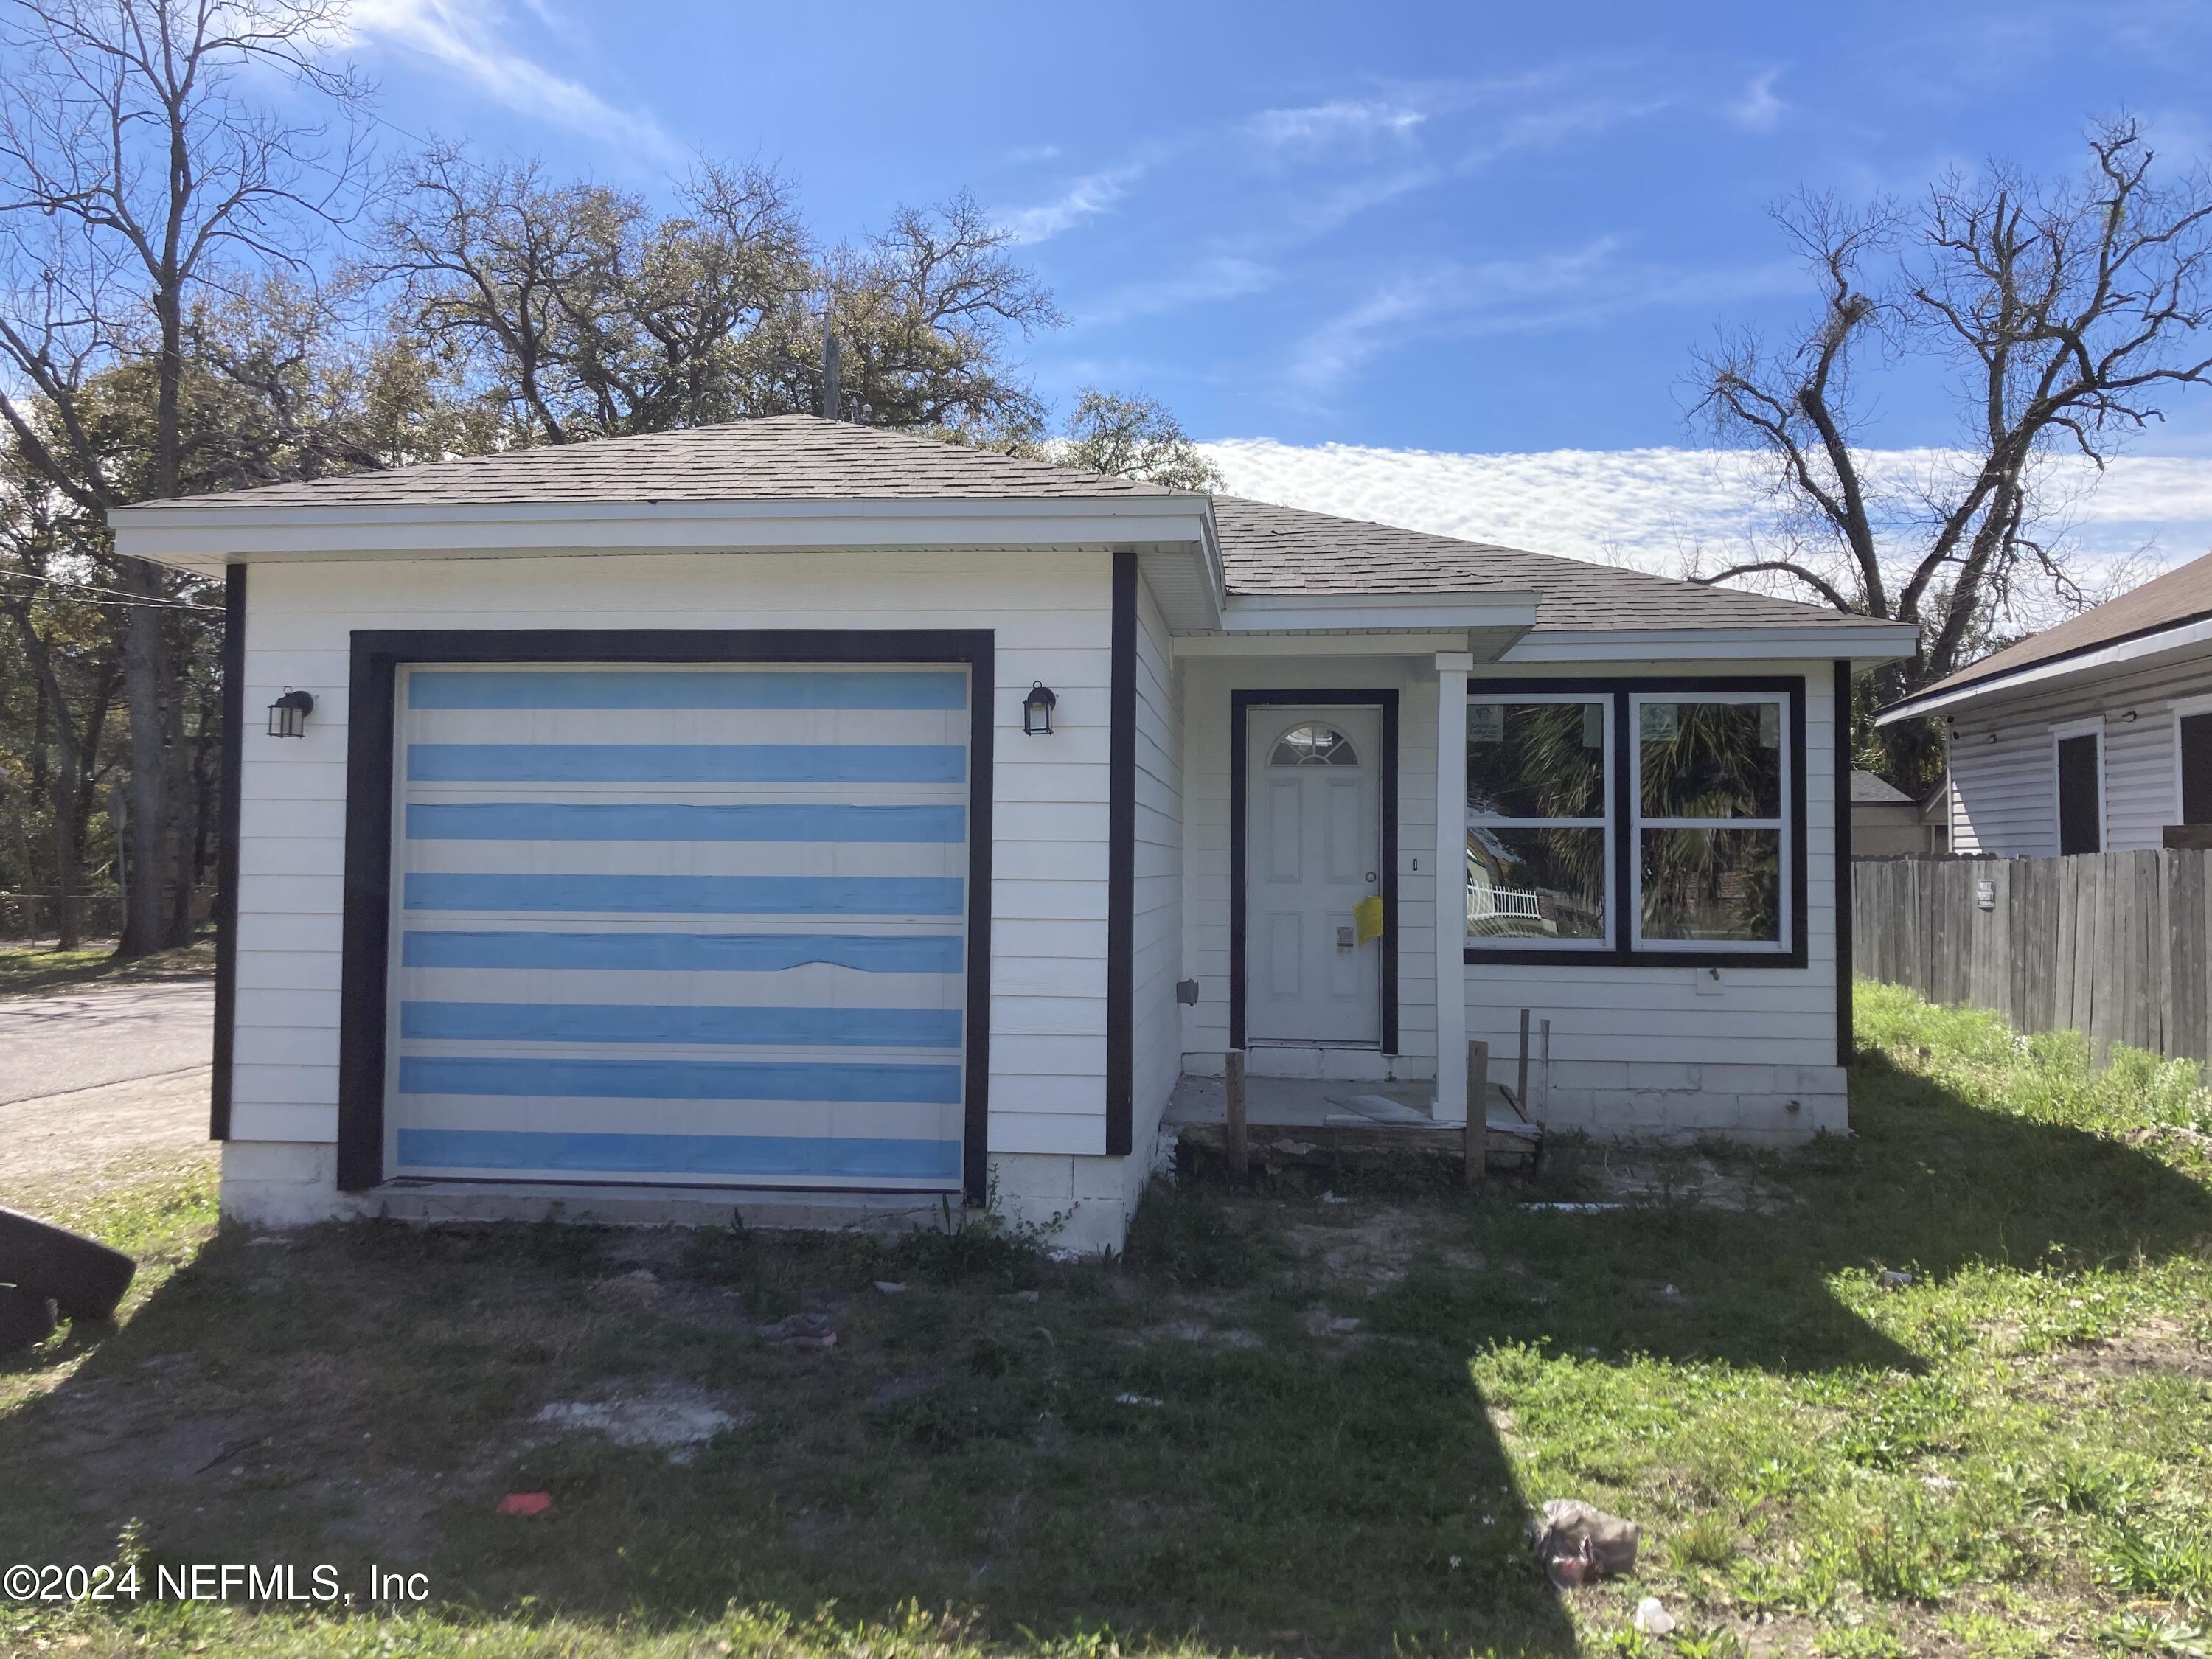 Jacksonville, FL home for sale located at 1030 W 8th Street, Jacksonville, FL 32209